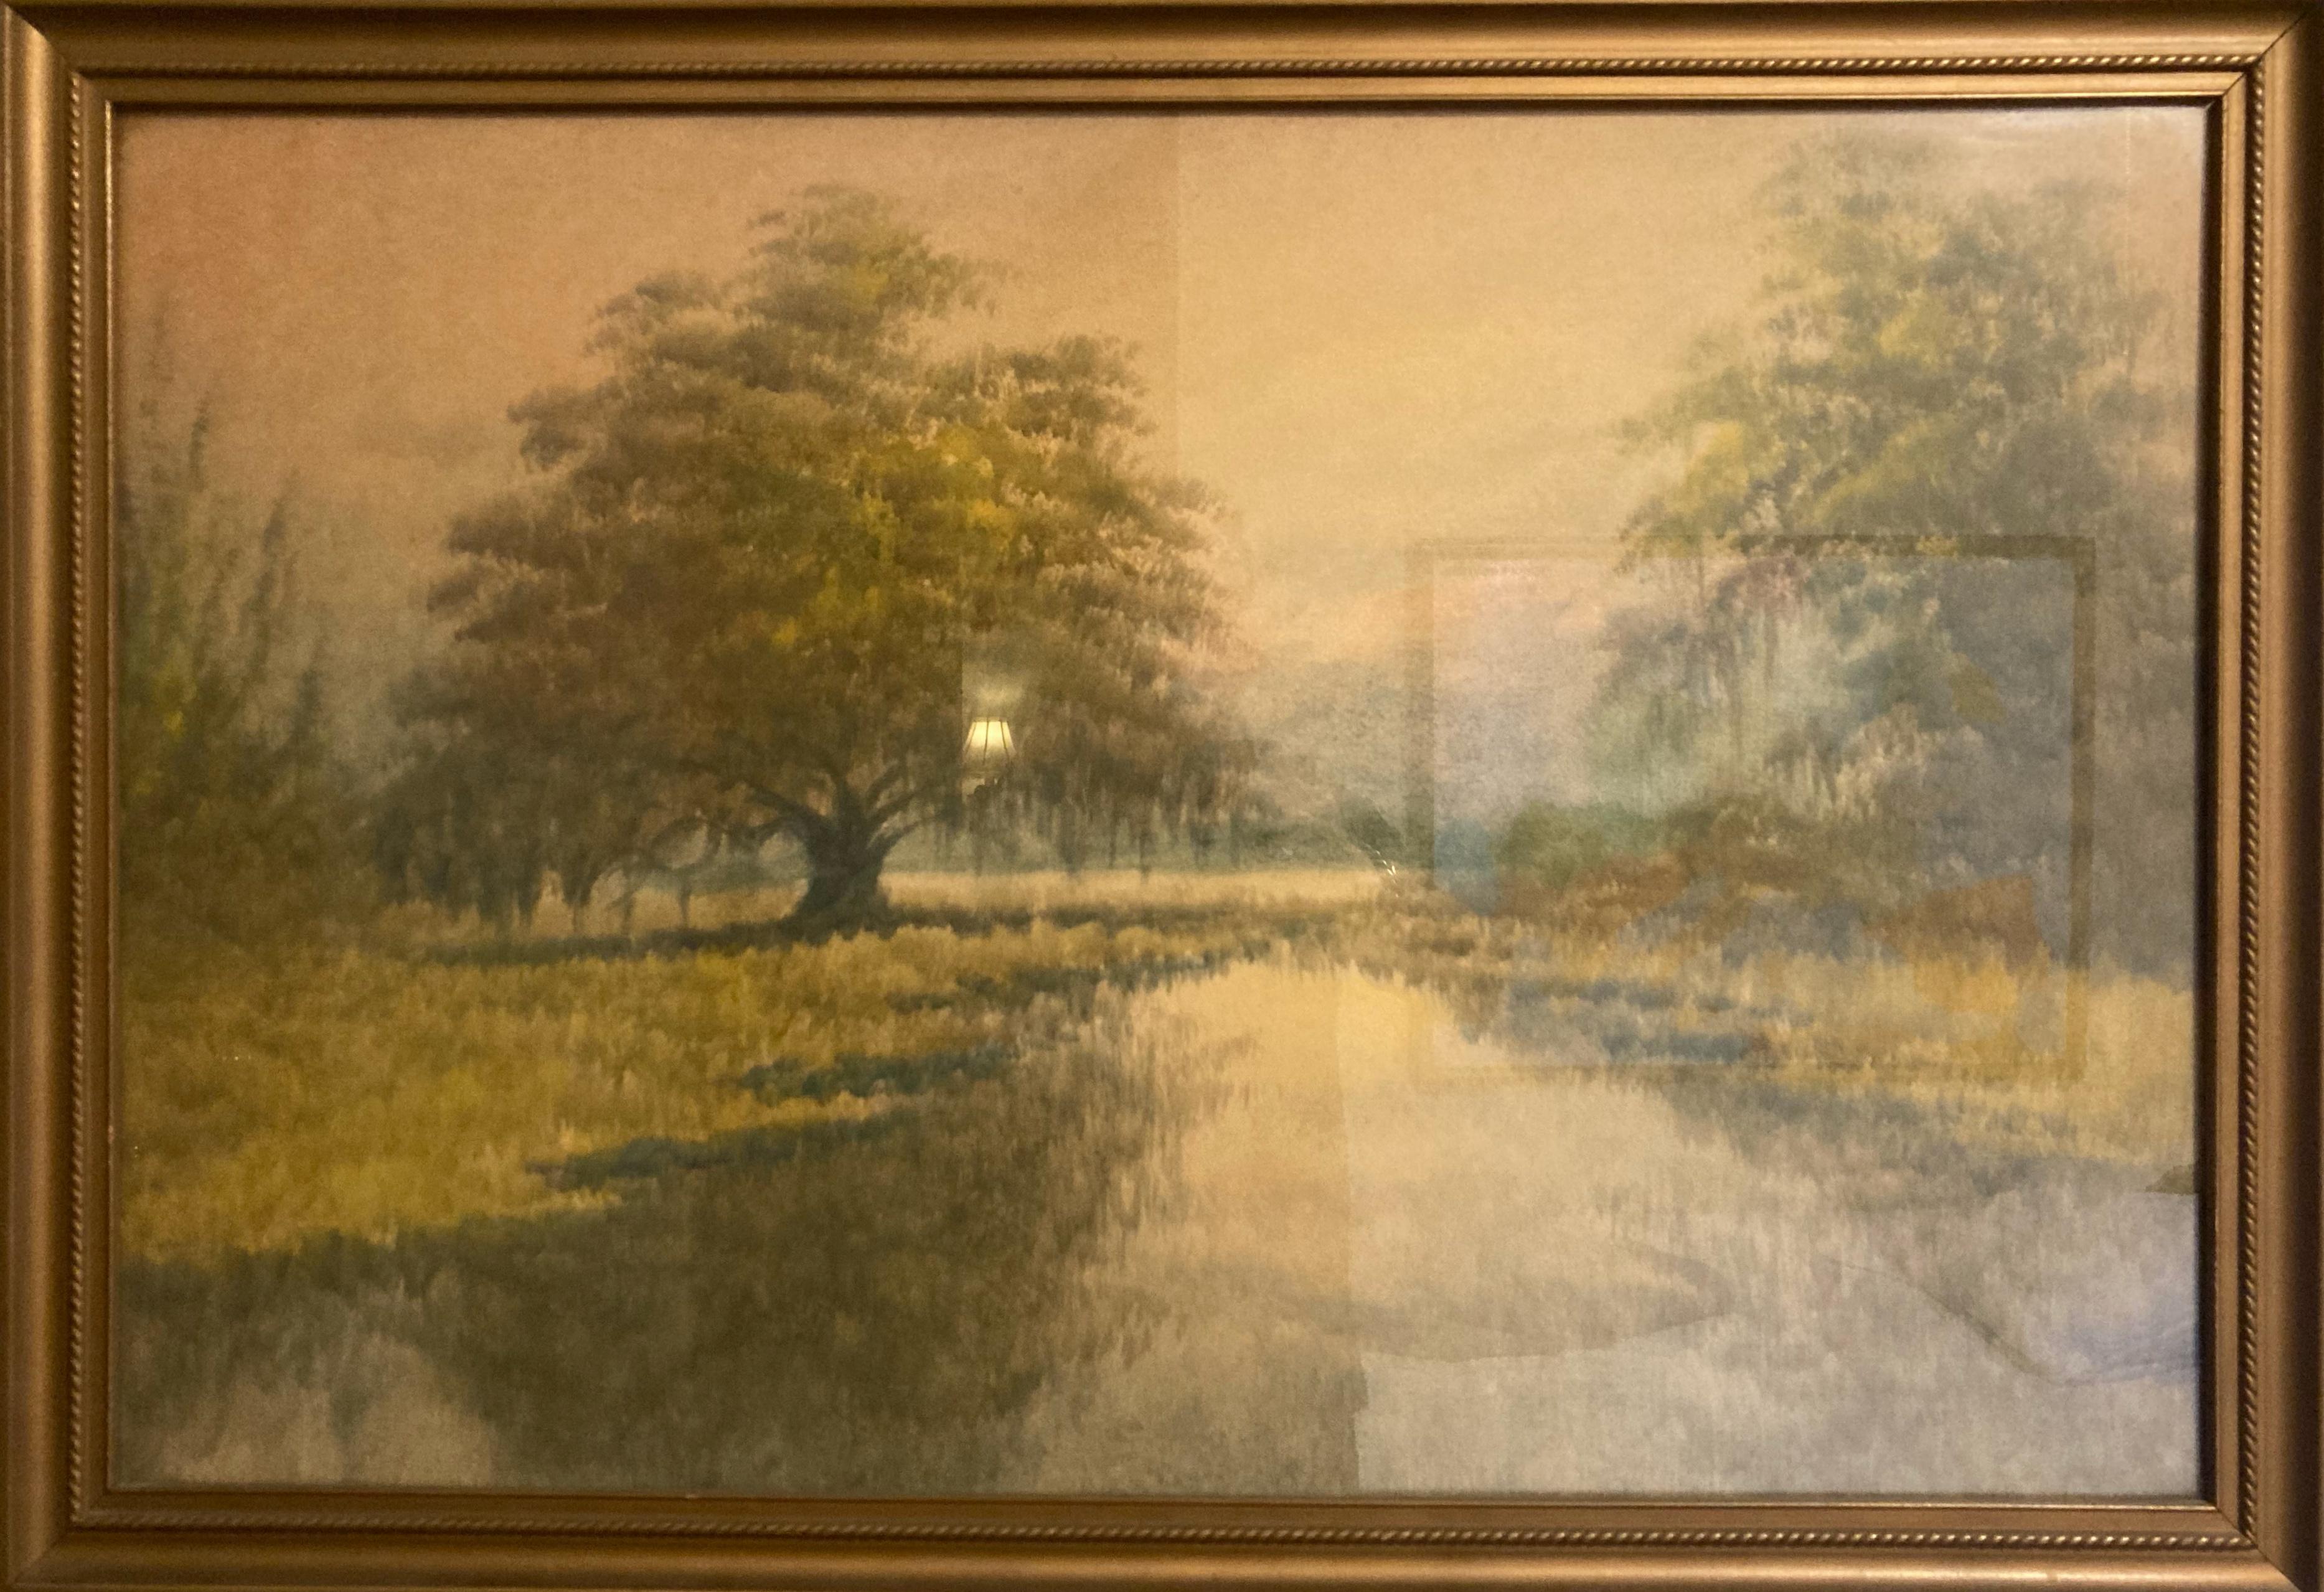 (Sorry for reflections in the glass.) A fine Alexander Drysdale oil wash out of an estate here in New Orleans.  A classic Drysdale in every way, of good size, in fabulous condition. If you clicked on this, you probably already know that Drysdale was